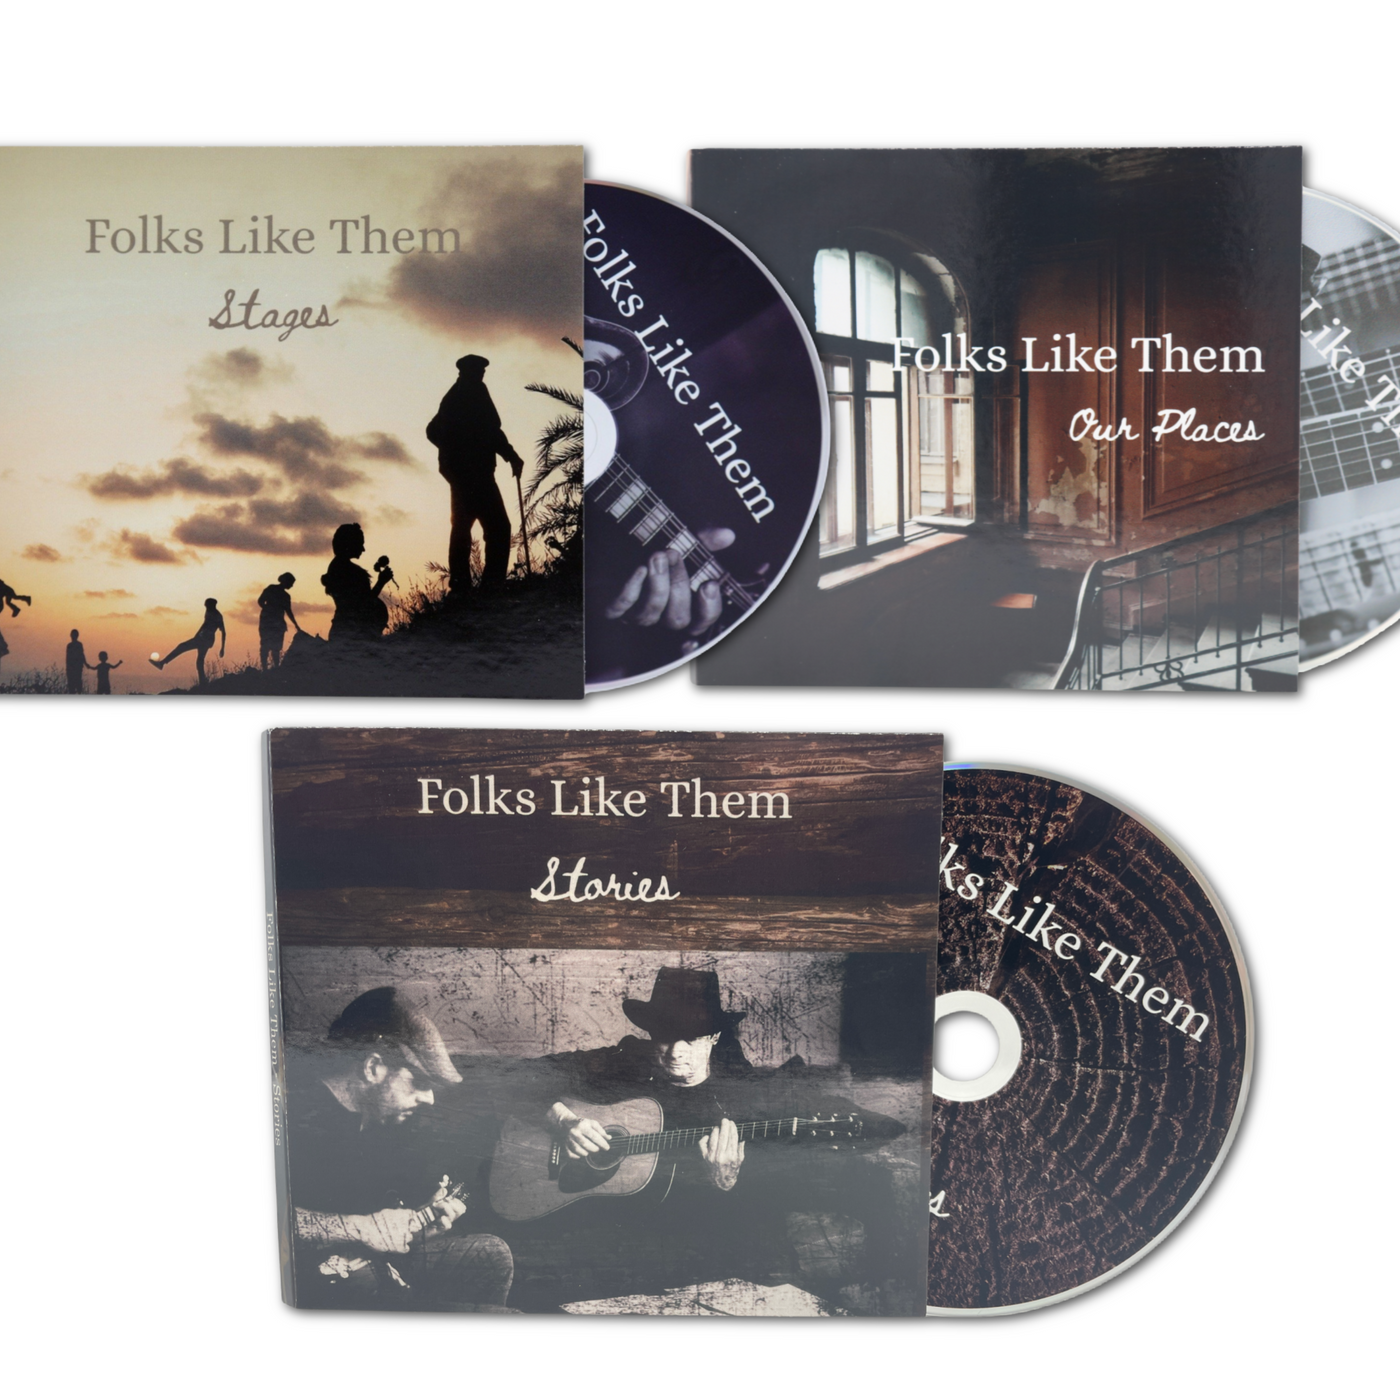 Our Places, Stages and Stories CD FREE Shipping Bundle